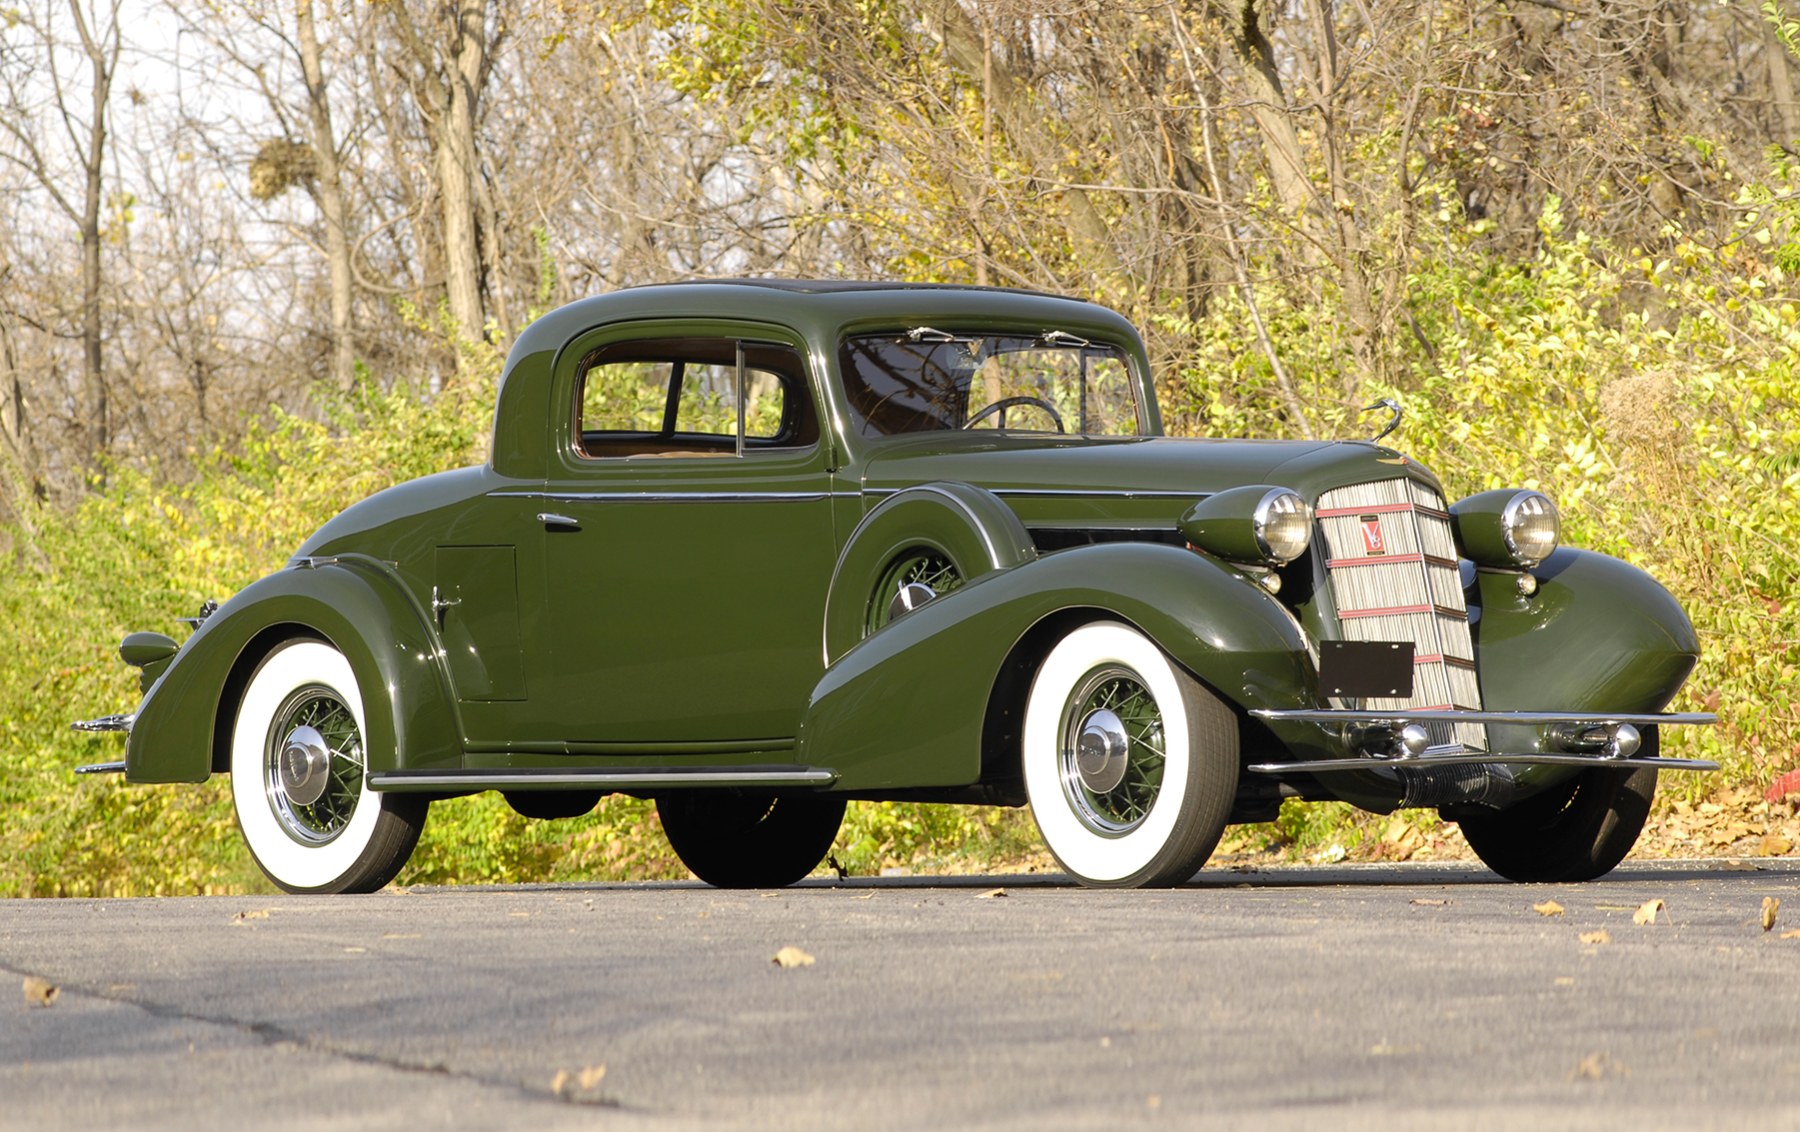 1934 Cadillac V-8 355D Rumble Seat Coupe